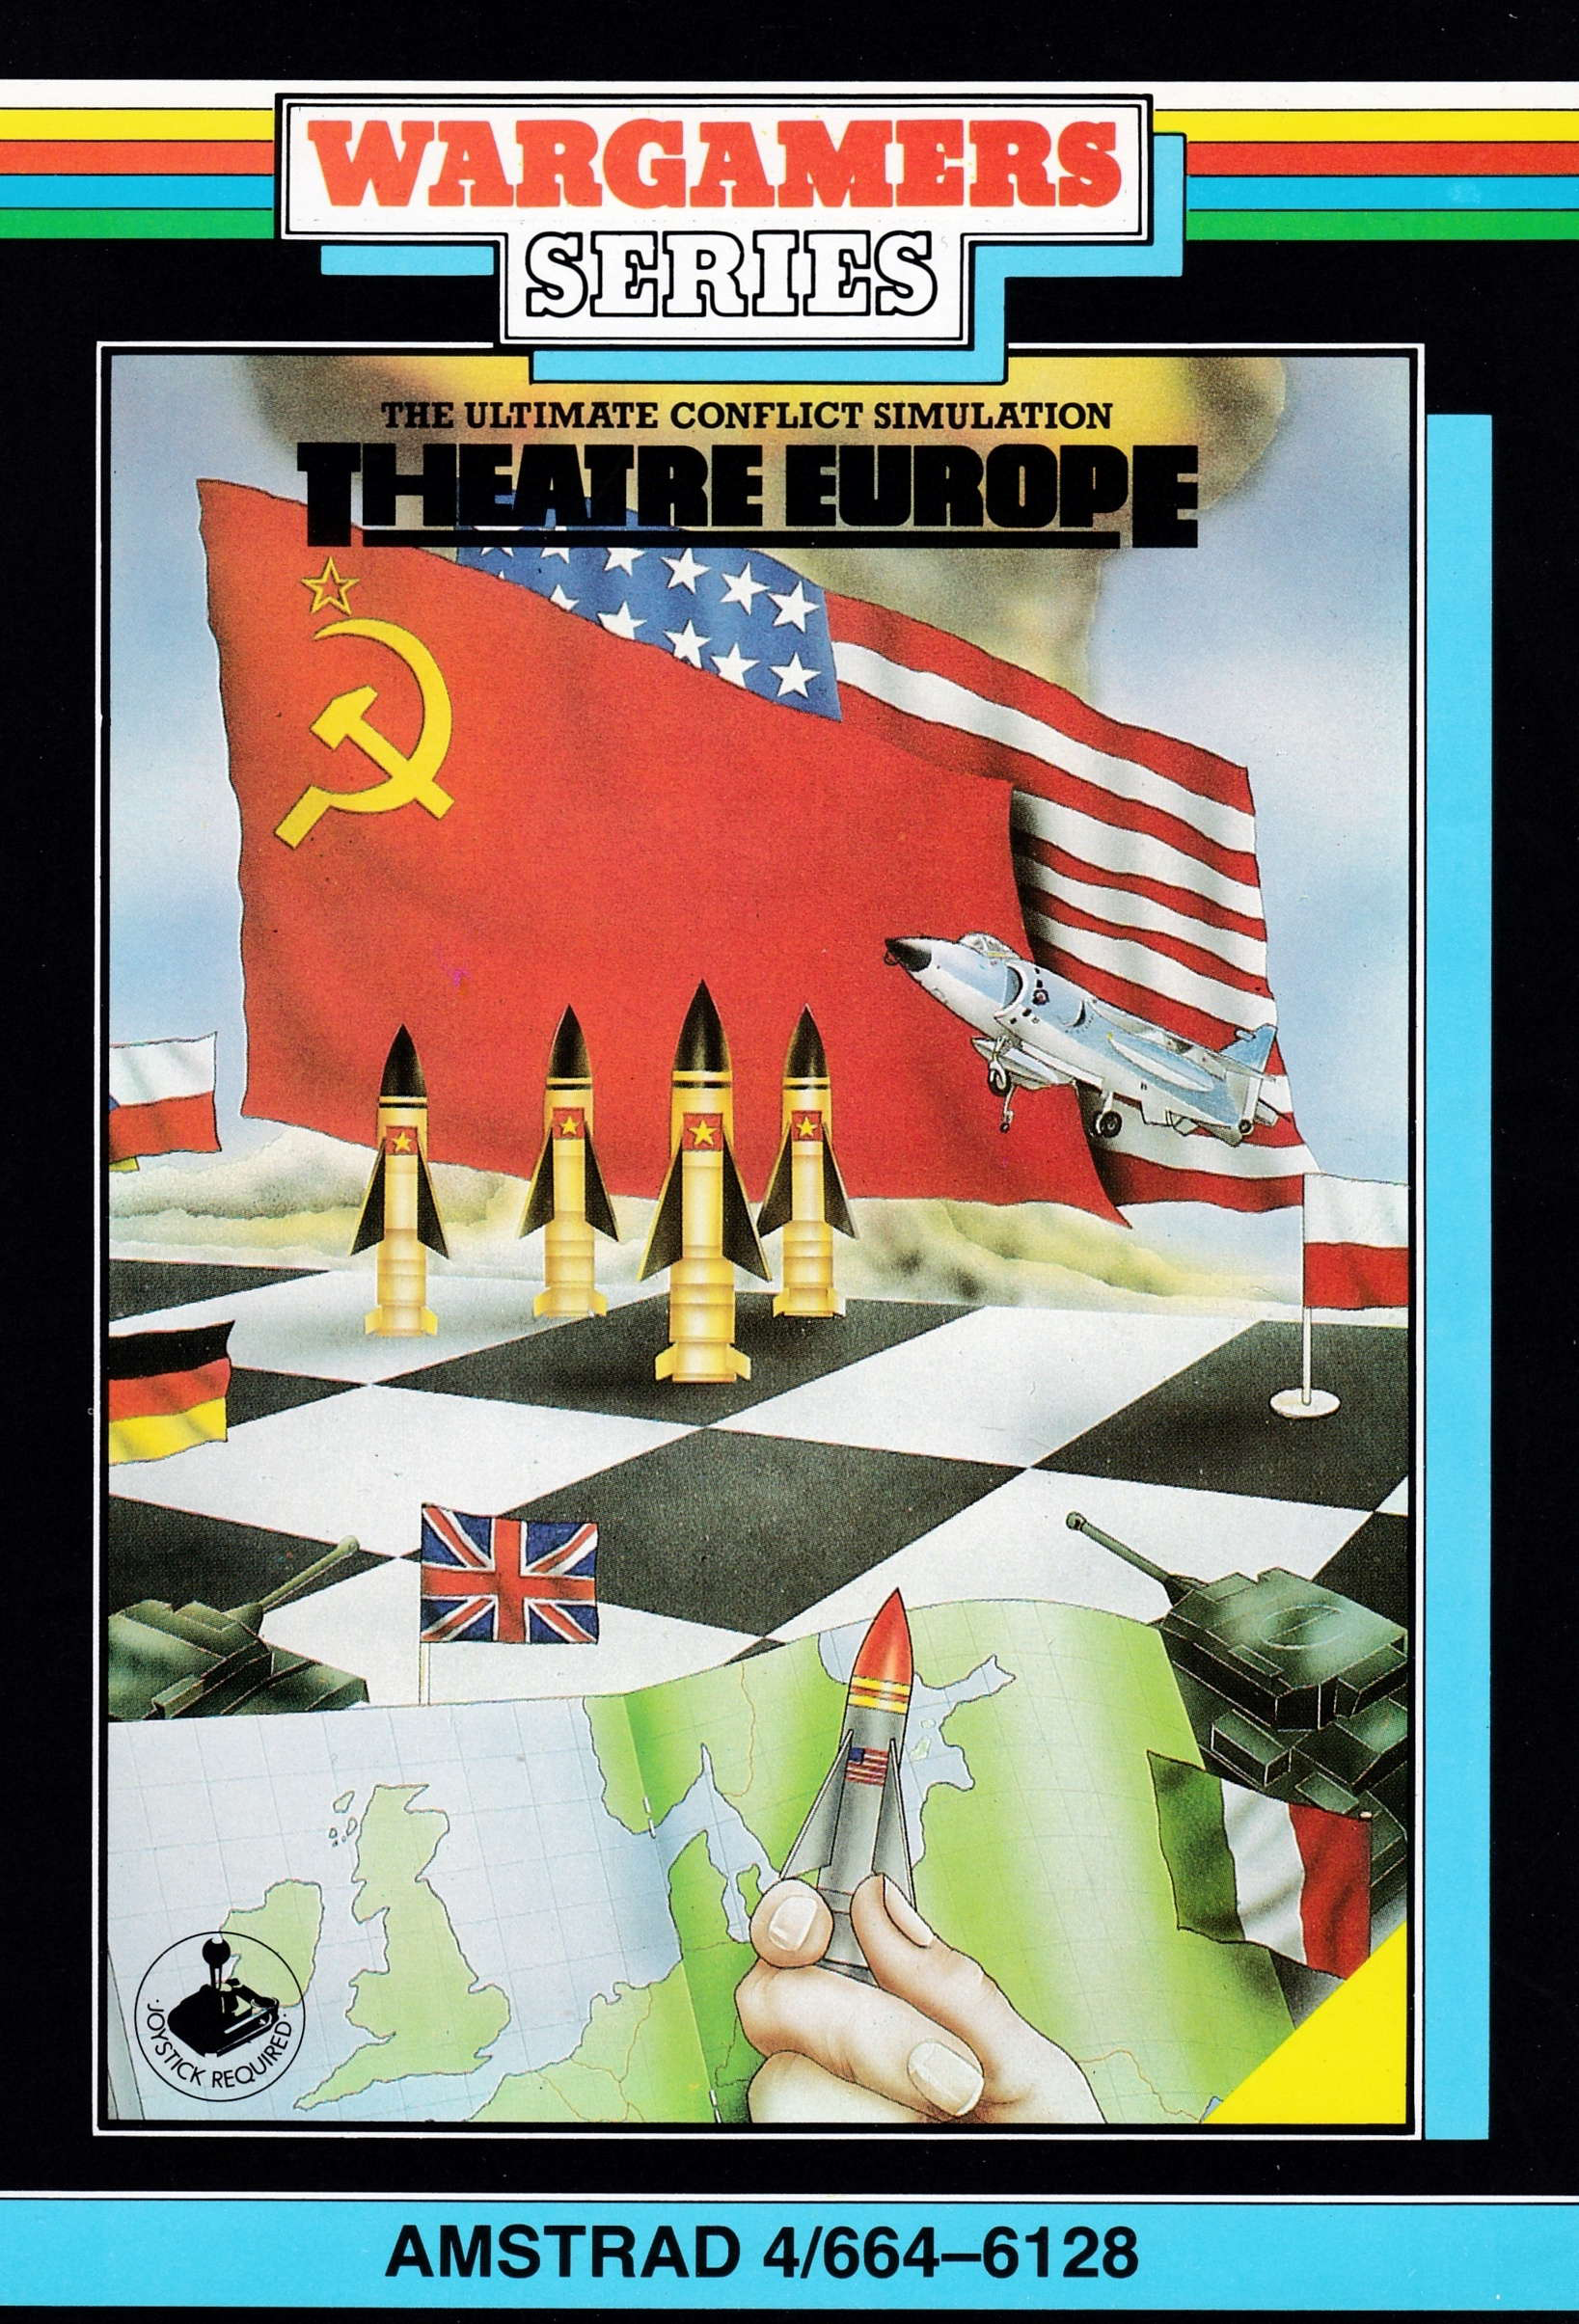 cover of the Amstrad CPC game Theatre Europe  by GameBase CPC